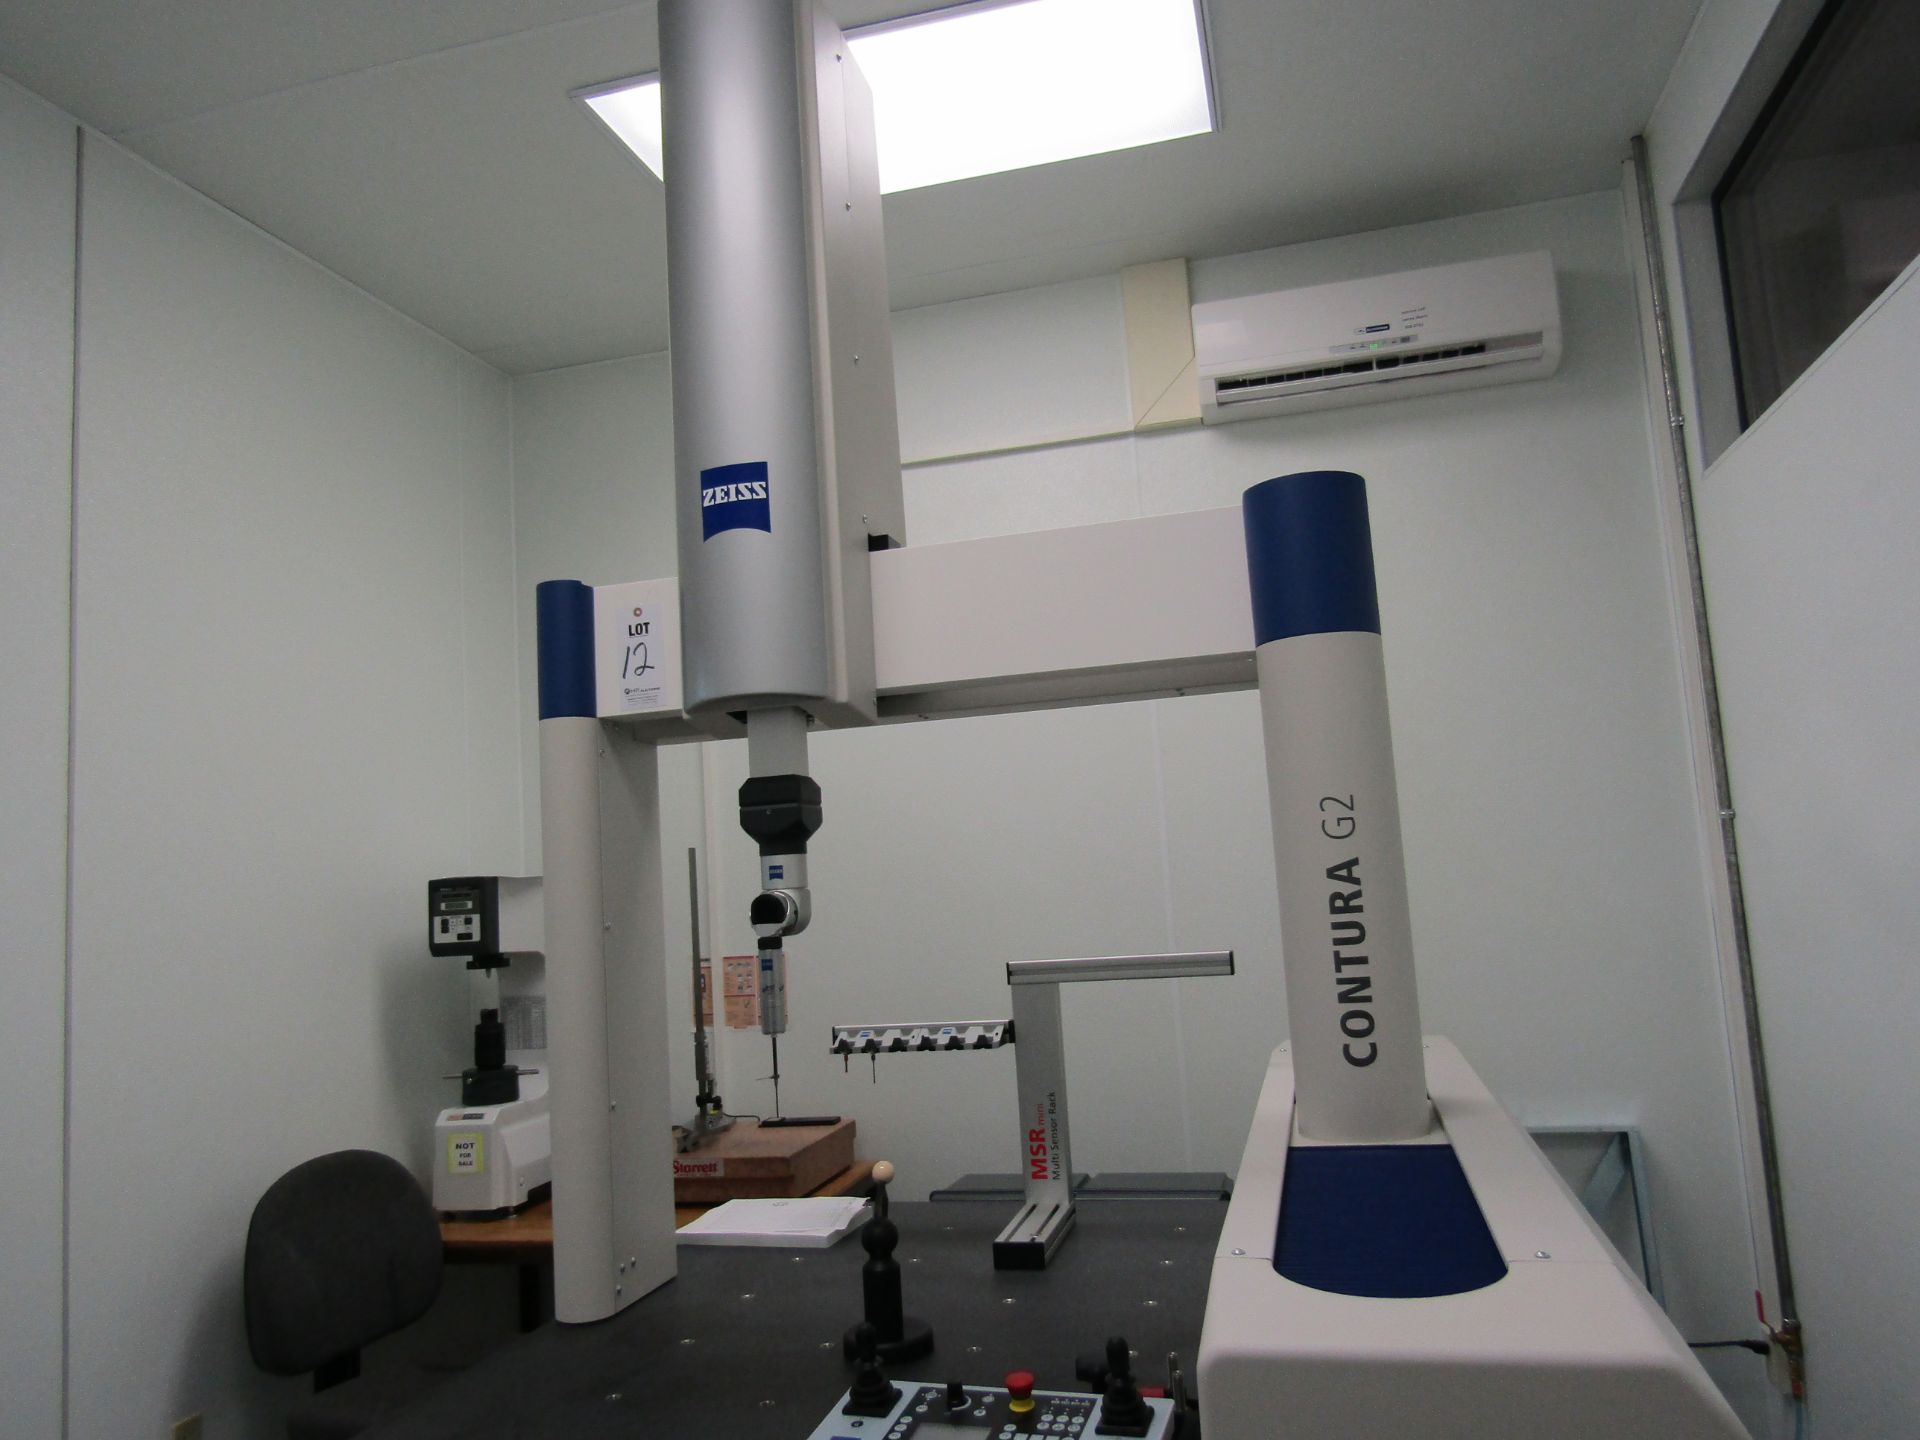 2014 ZEISS CONTURA G2 RDS COORDINATE MEASURING MACHINE W/ CURRENT CALYPSO SOFTWARE, LIKE-NEW